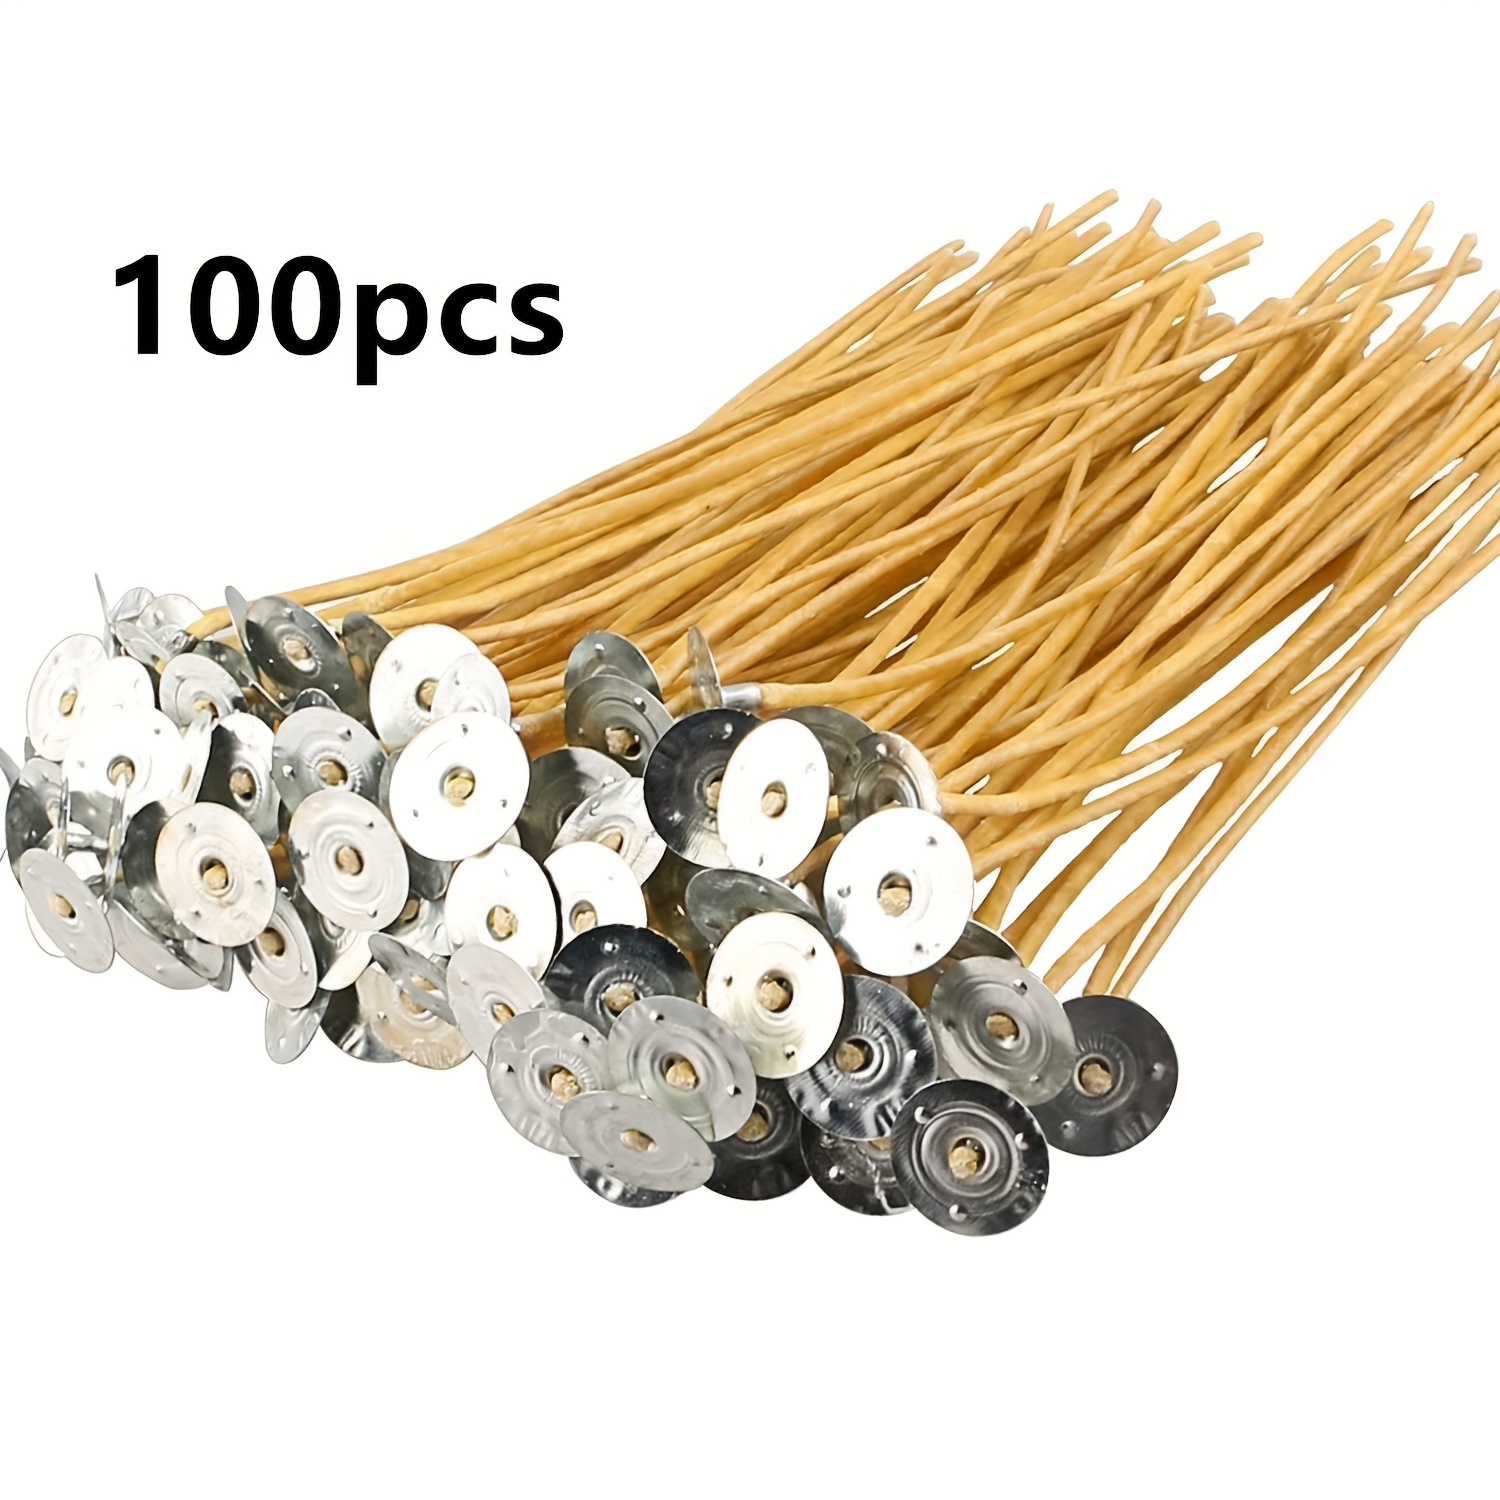 100pcs Wood Wicks for Candles,Natural Wooden Candle Wicks with Candle Wick Trimmer,Smokeless Crackling Wooden Candle Wicks for DIY Candle Making